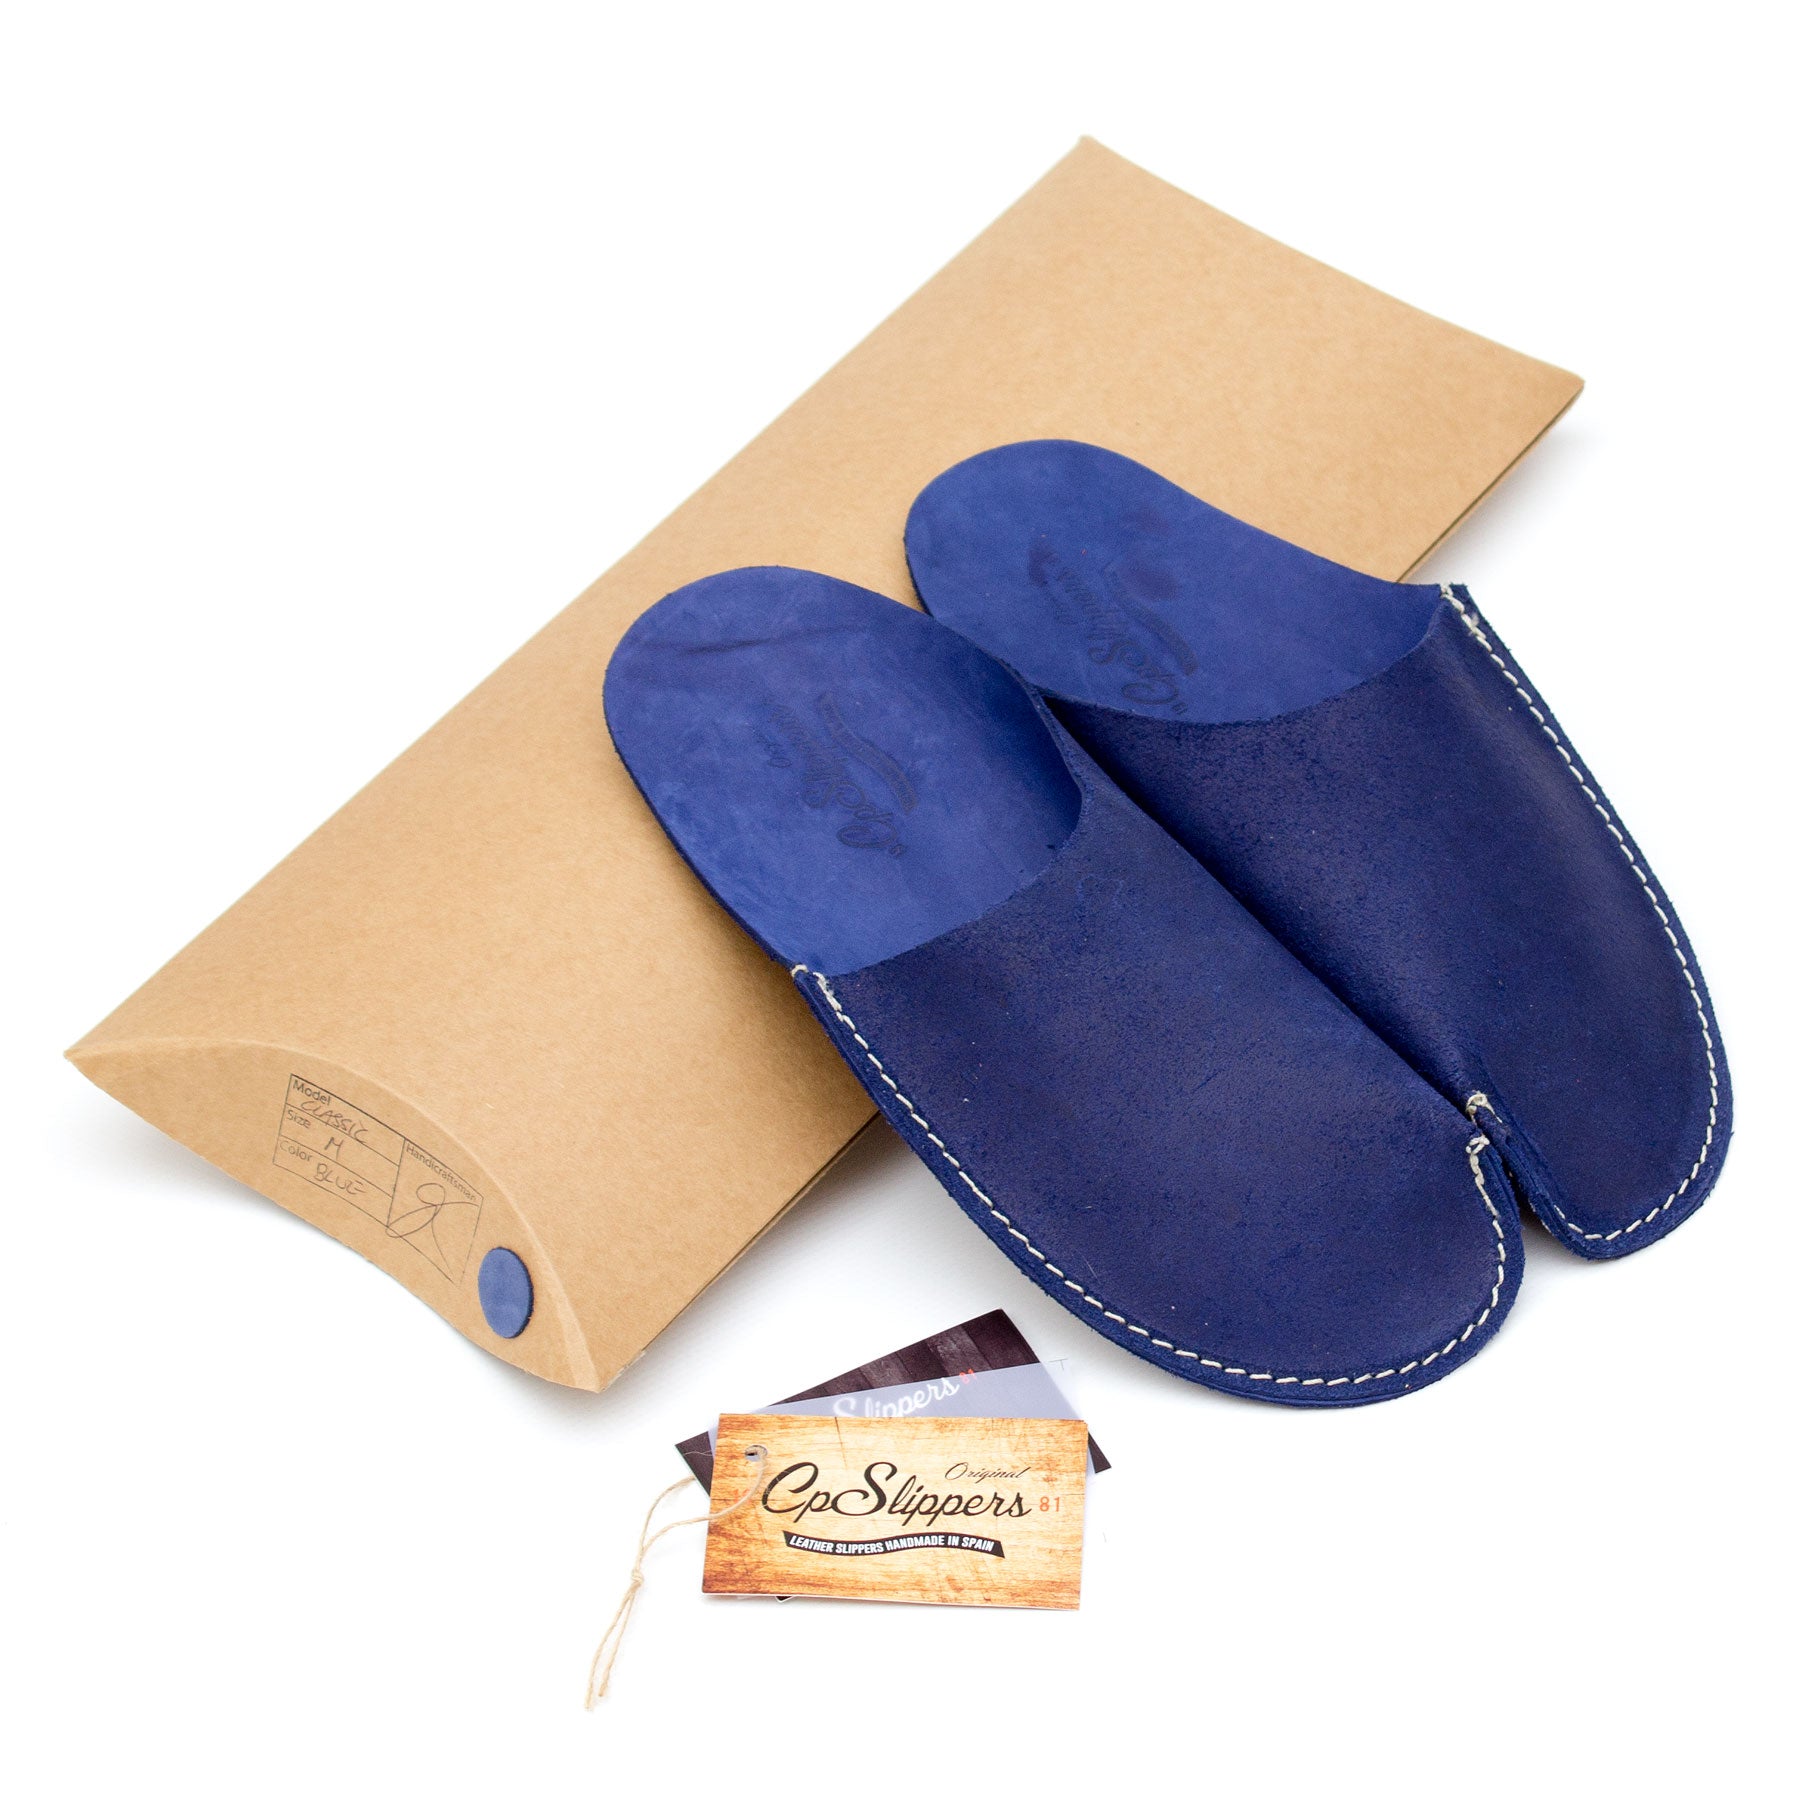 Blue CP Slippers minimalist box for men and women home shoes